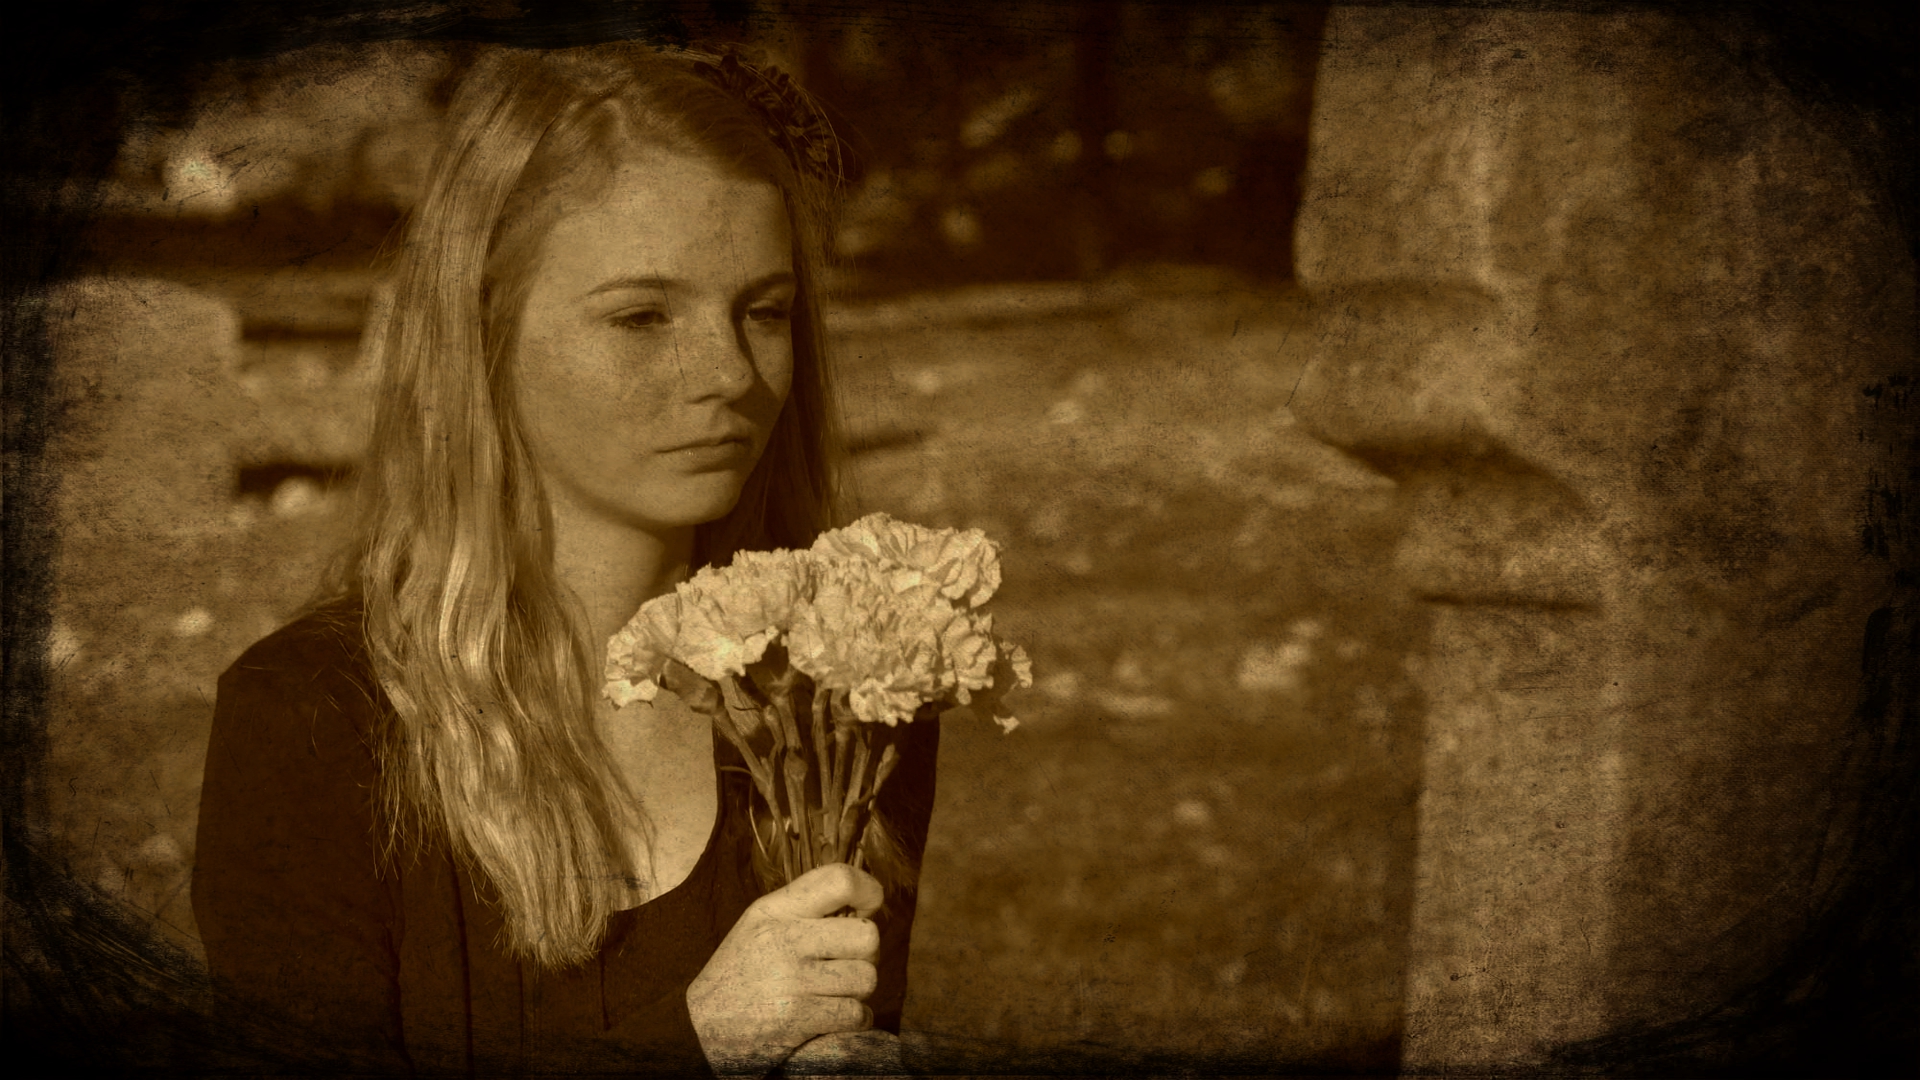 teen-upset-and-sad-sitting-at-grave-with-flowers-4k_hl17v2gqg_thumbnail-full01